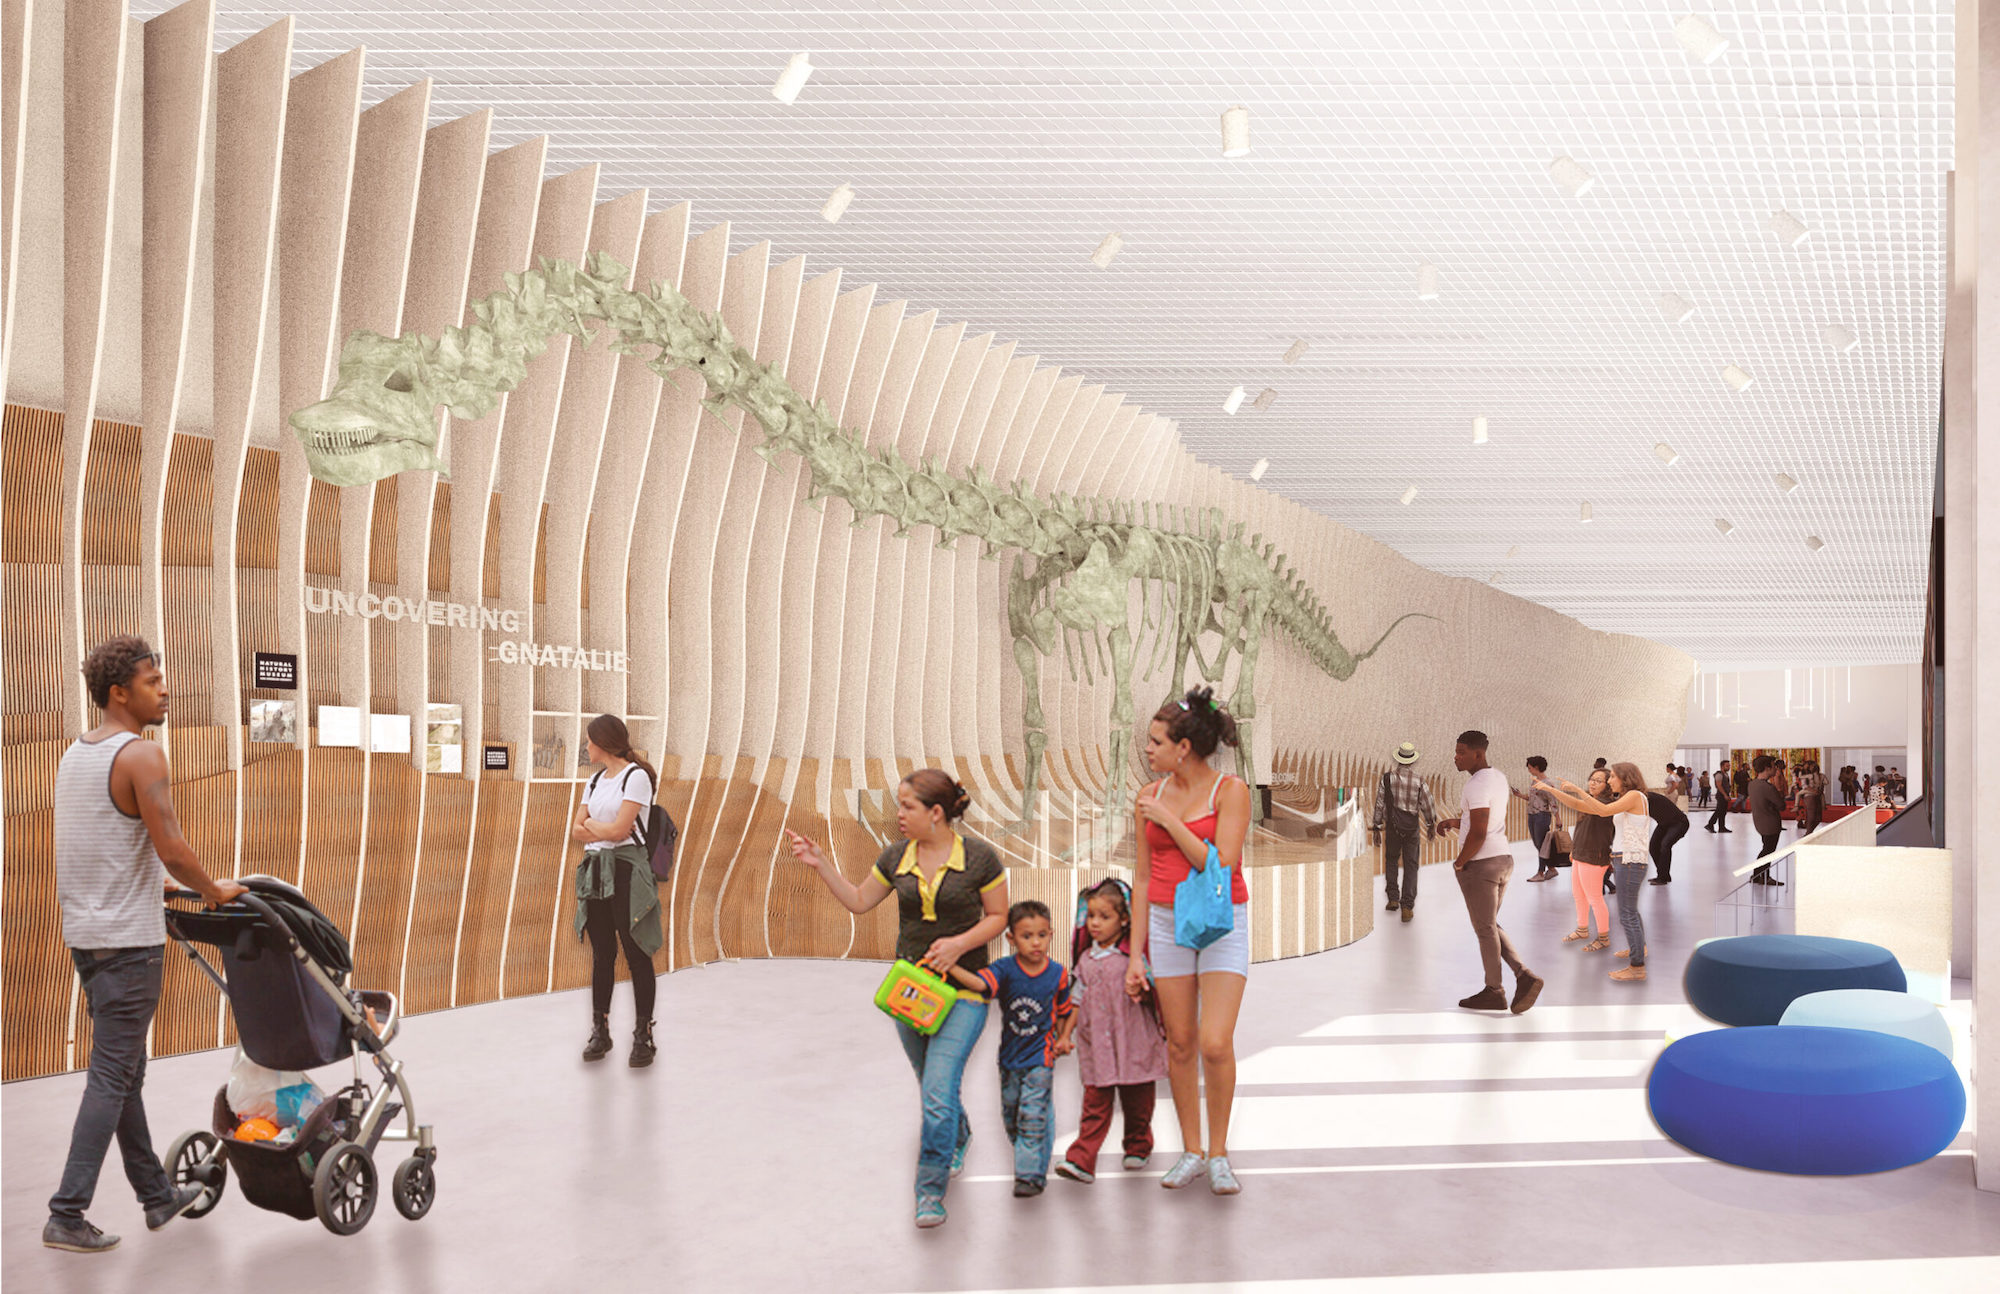 New wing of Natural History Museums of Los Angeles to be a destination and portal